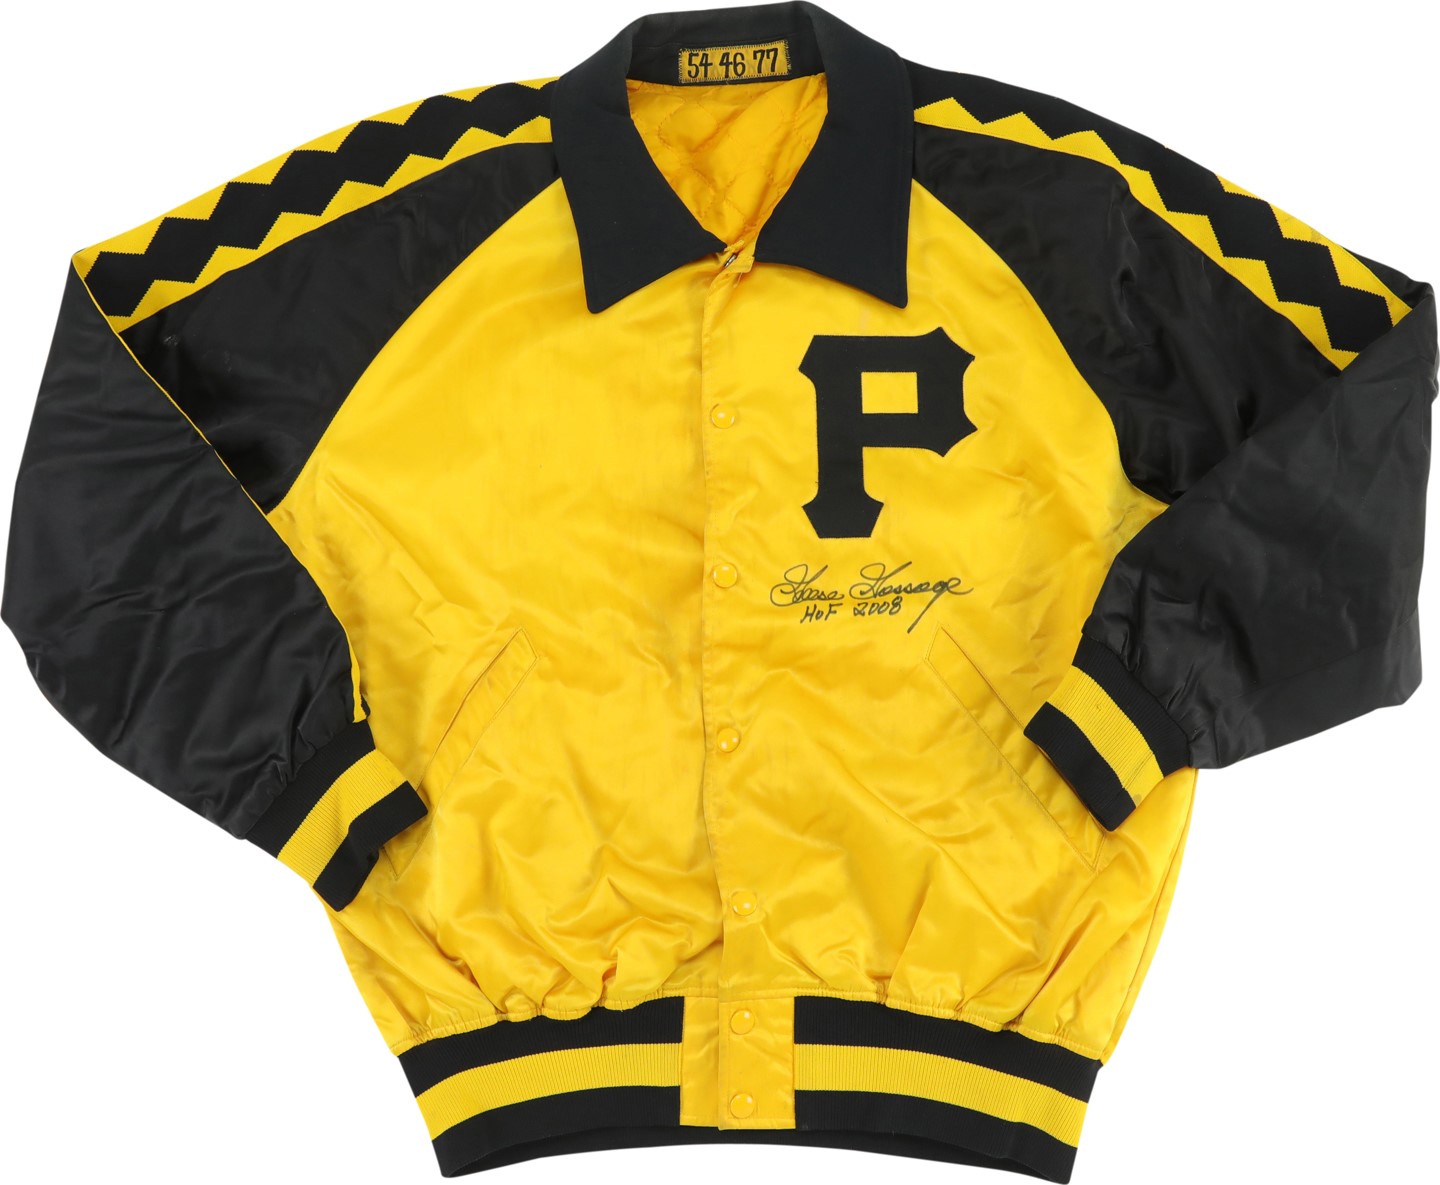 Clemente and Pittsburgh Pirates - 1977 Goose Gossage Pittsburgh Pirates Signed Game Worn Jacket (Gossage LOA)